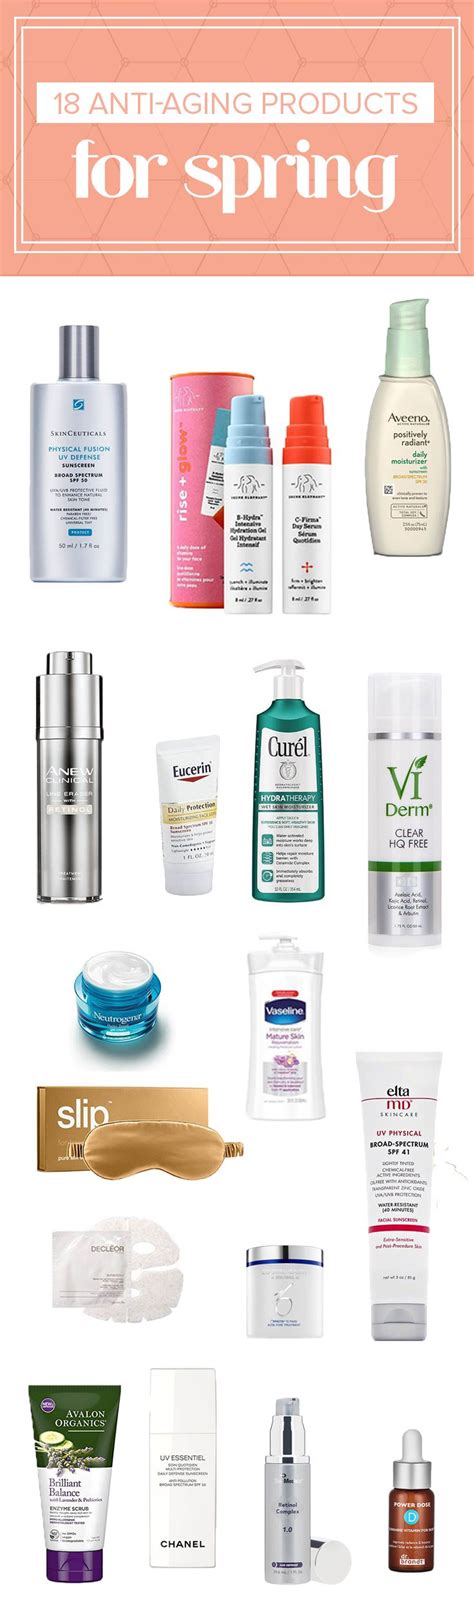 Dermatologist Recommended Skin Care Products For Aging Skin Skin Care